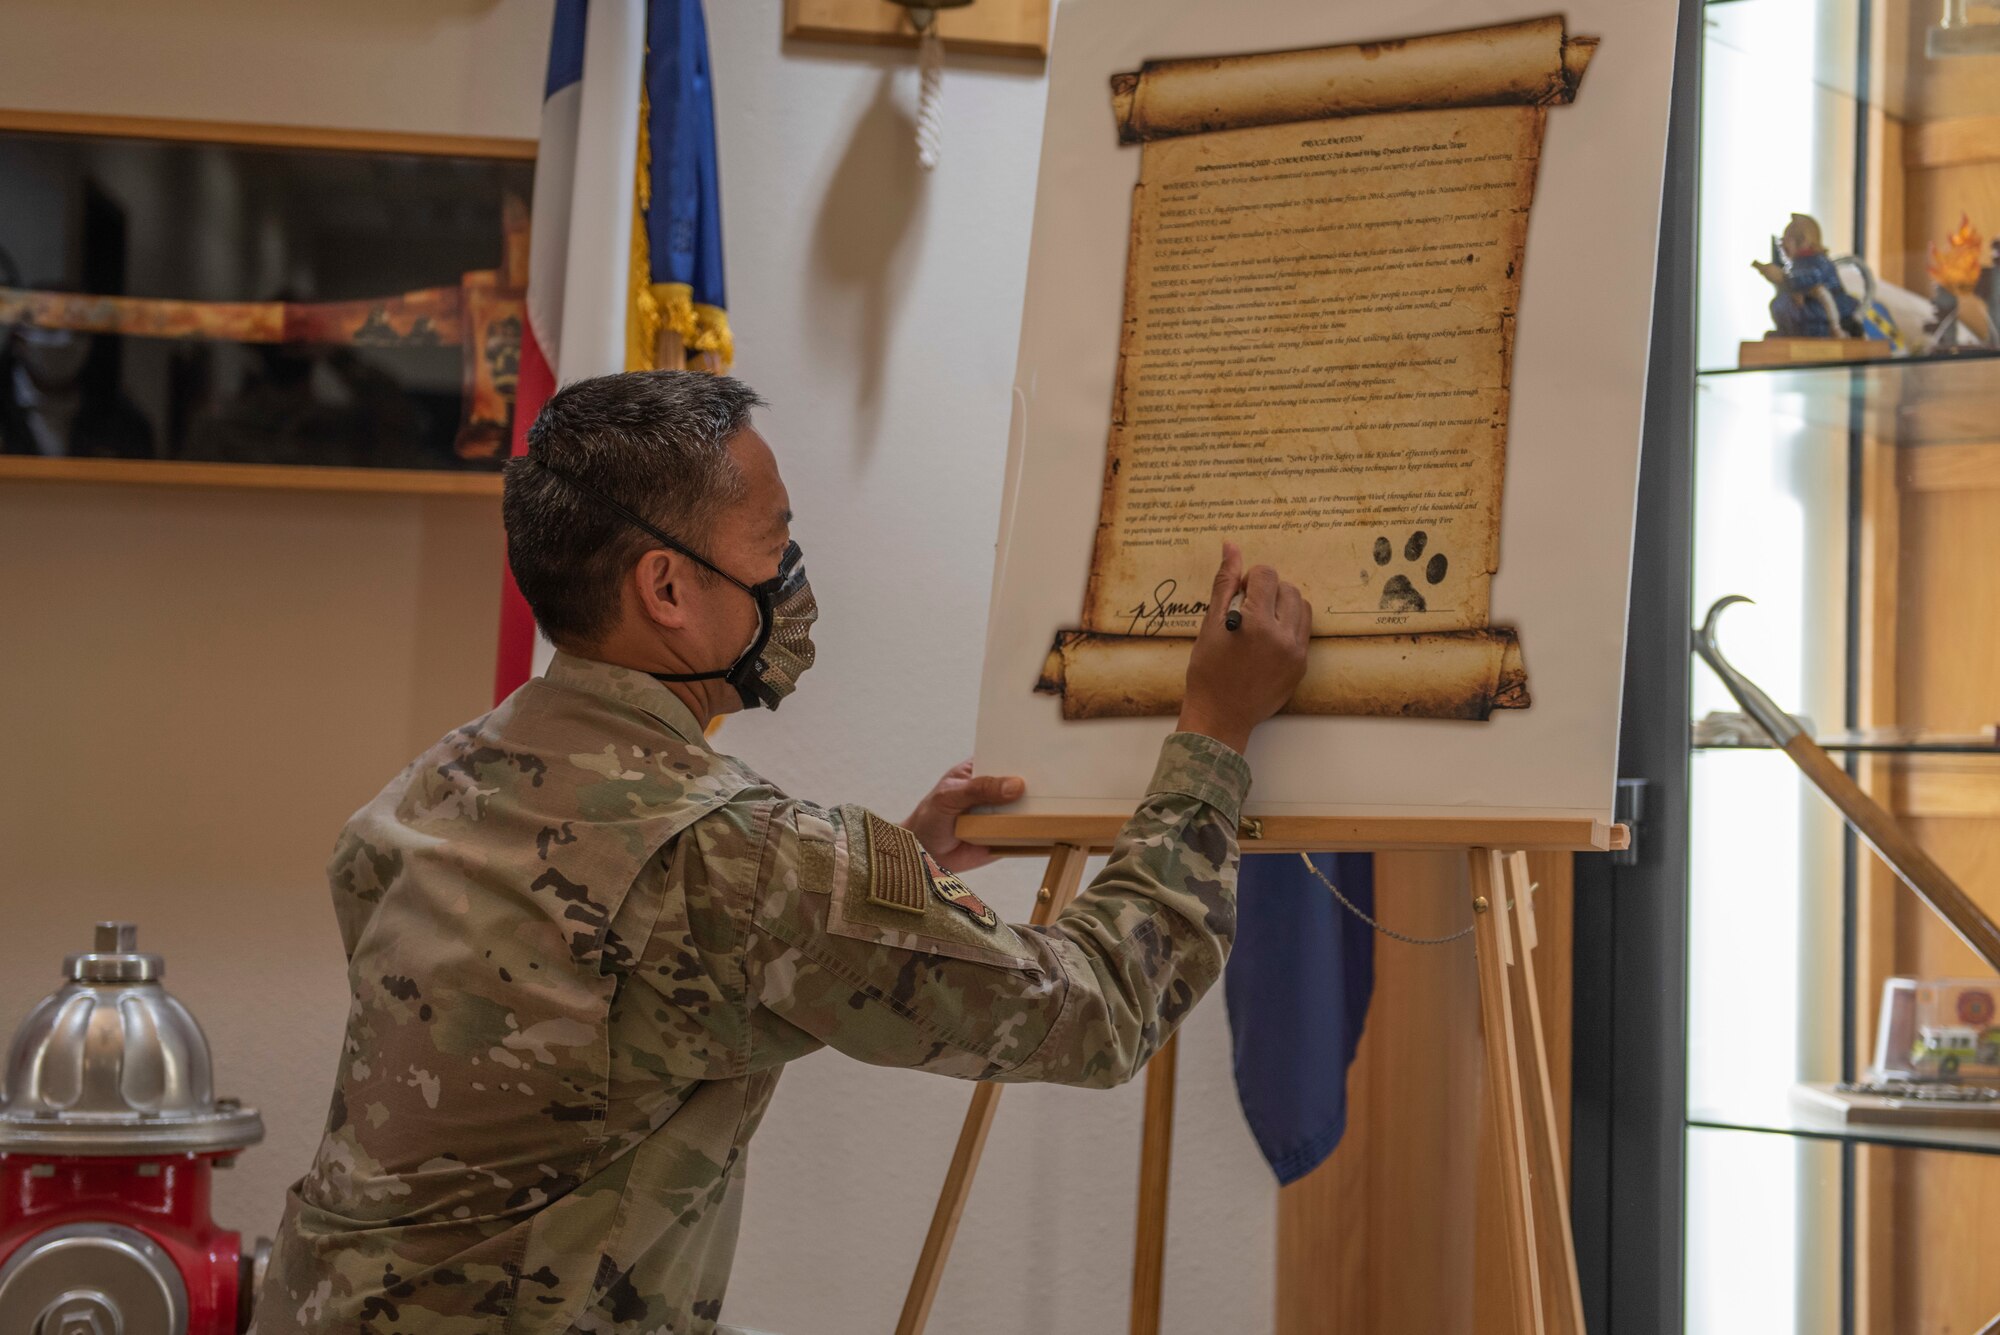 Col. Ed Sumangil, 7th Bomb Wing commander, signs a Fire Prevention Week proclamation at Dyess Air Force Base, Texas, Oct. 5, 2020. The Dyess AFB Fire Department plans annual community events to help communicate the importance of fire safety. (U.S. Air Force photo by Airman 1st Class Colin Hollowell)